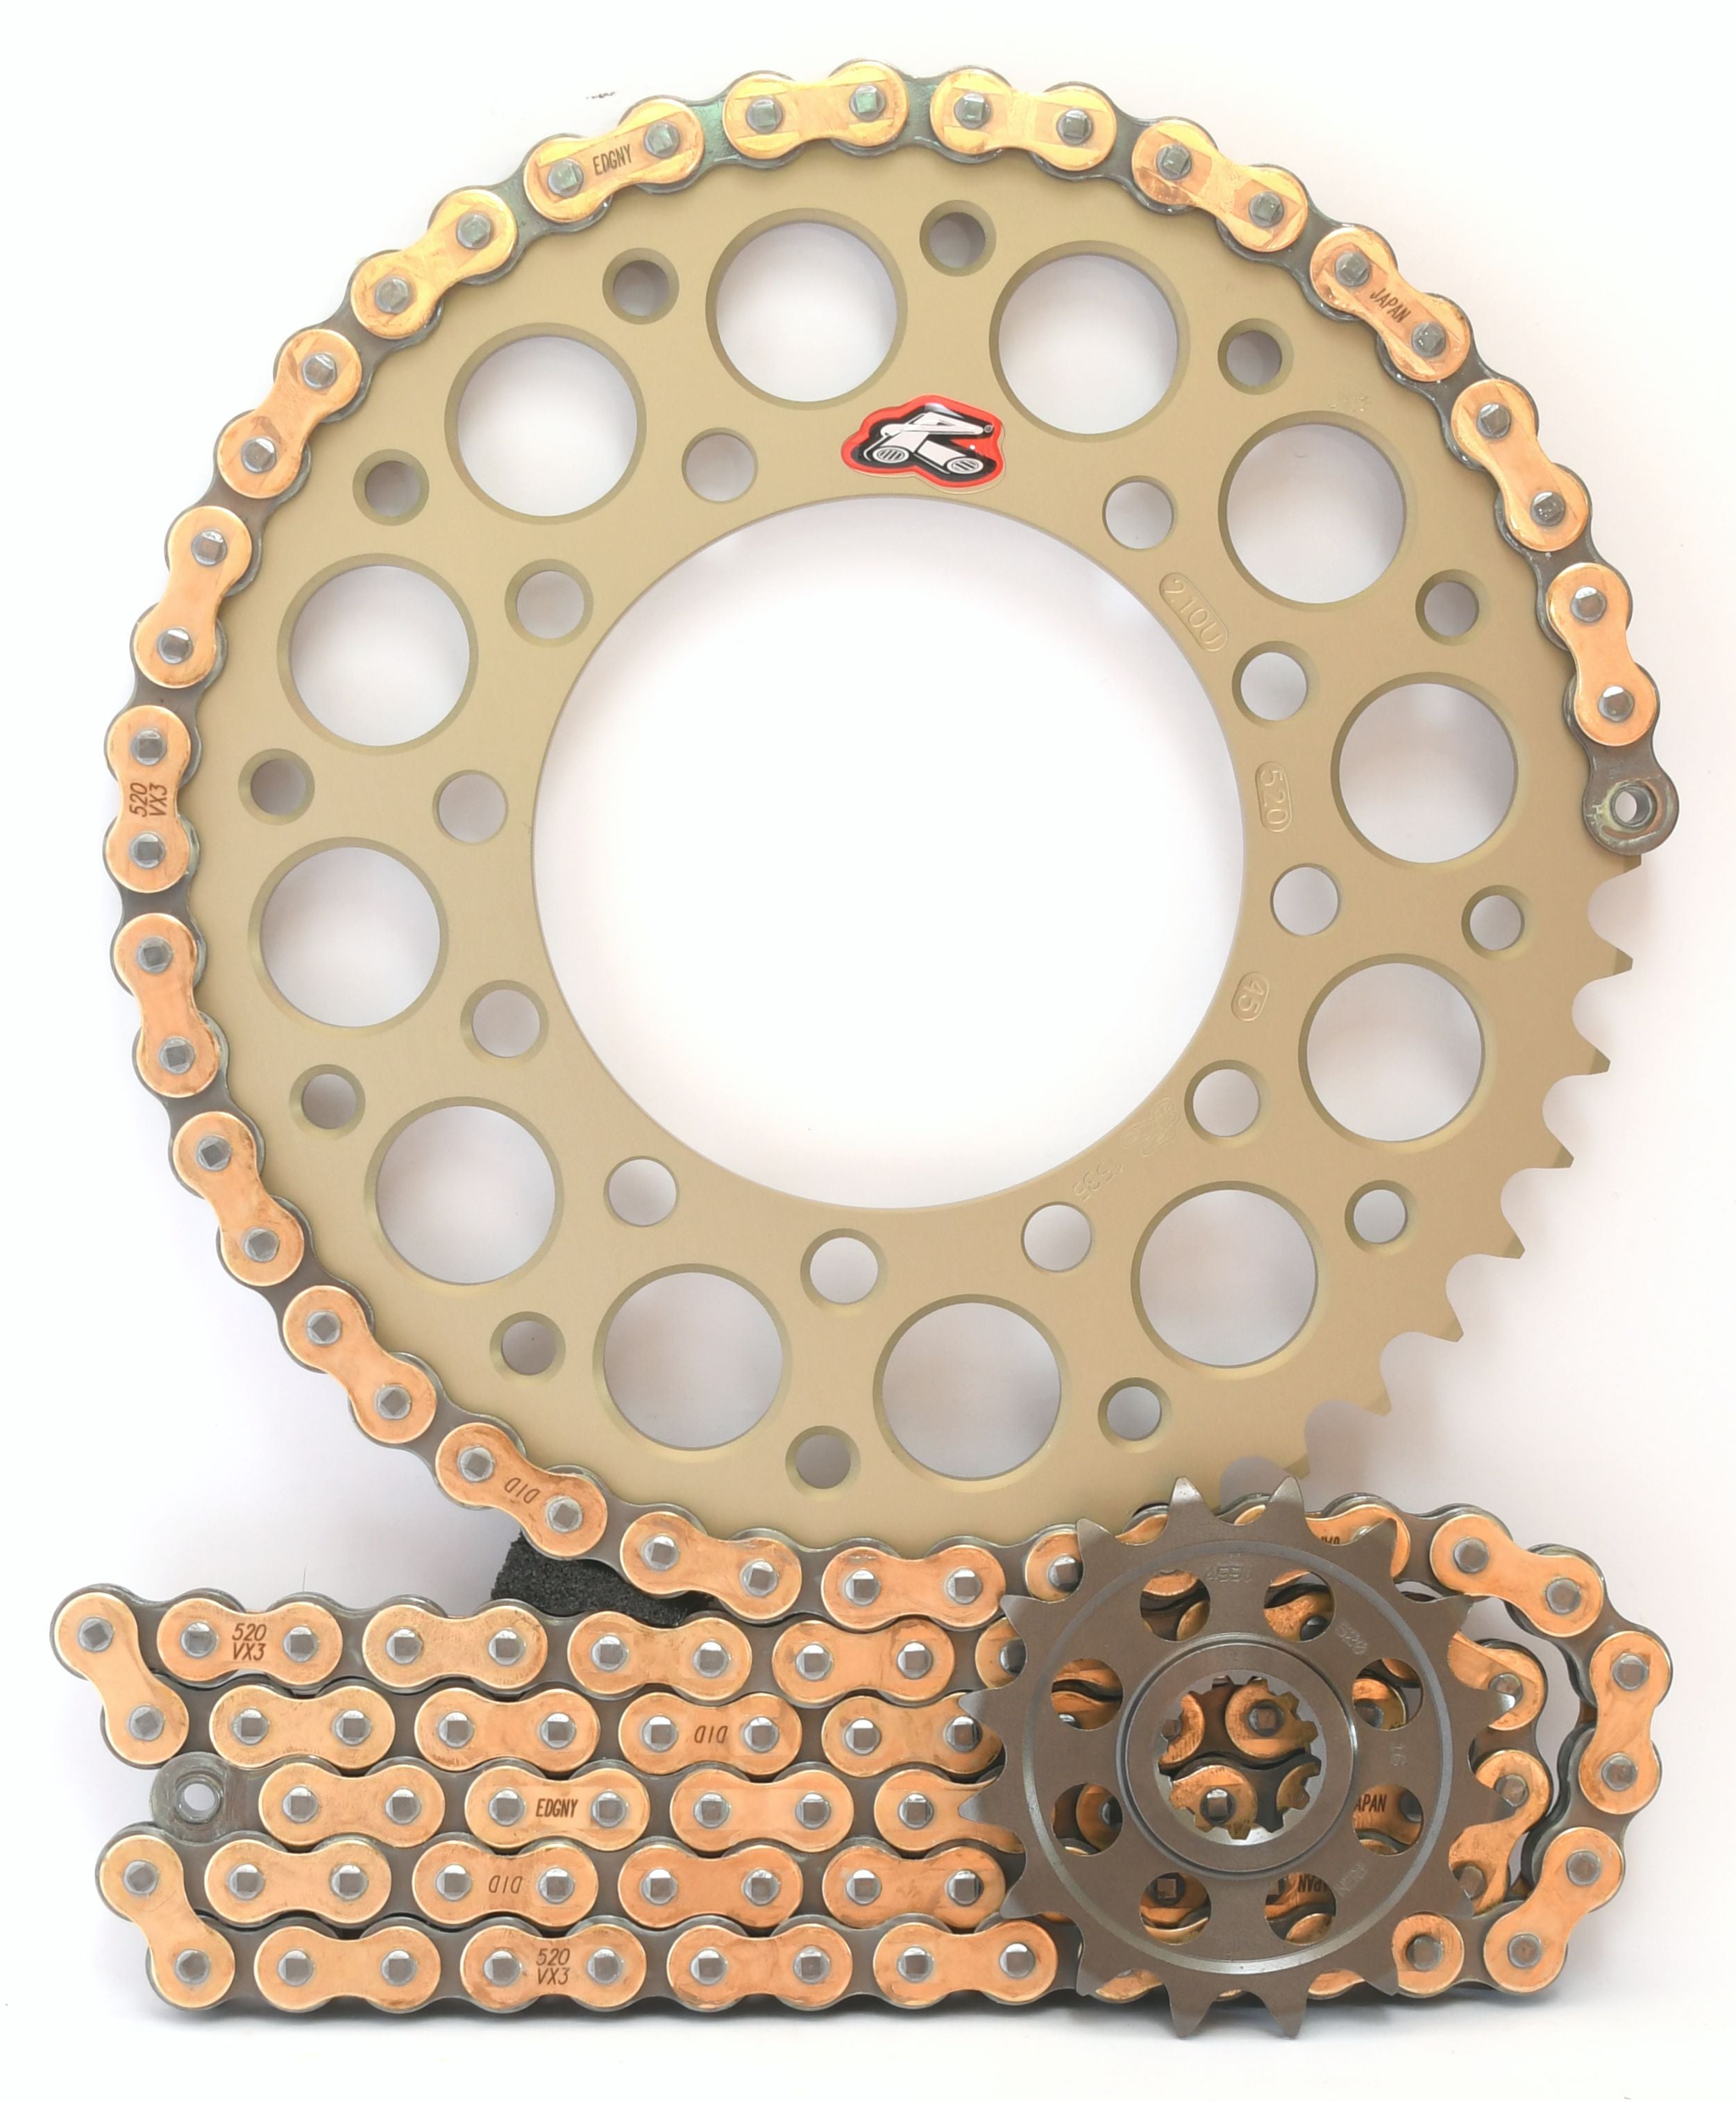 Renthal Ultralight and DID 520 Conversion Chain & Sprocket Kit for Suzuki GSX-R1000 2009-2016 - Choose Your Gearing